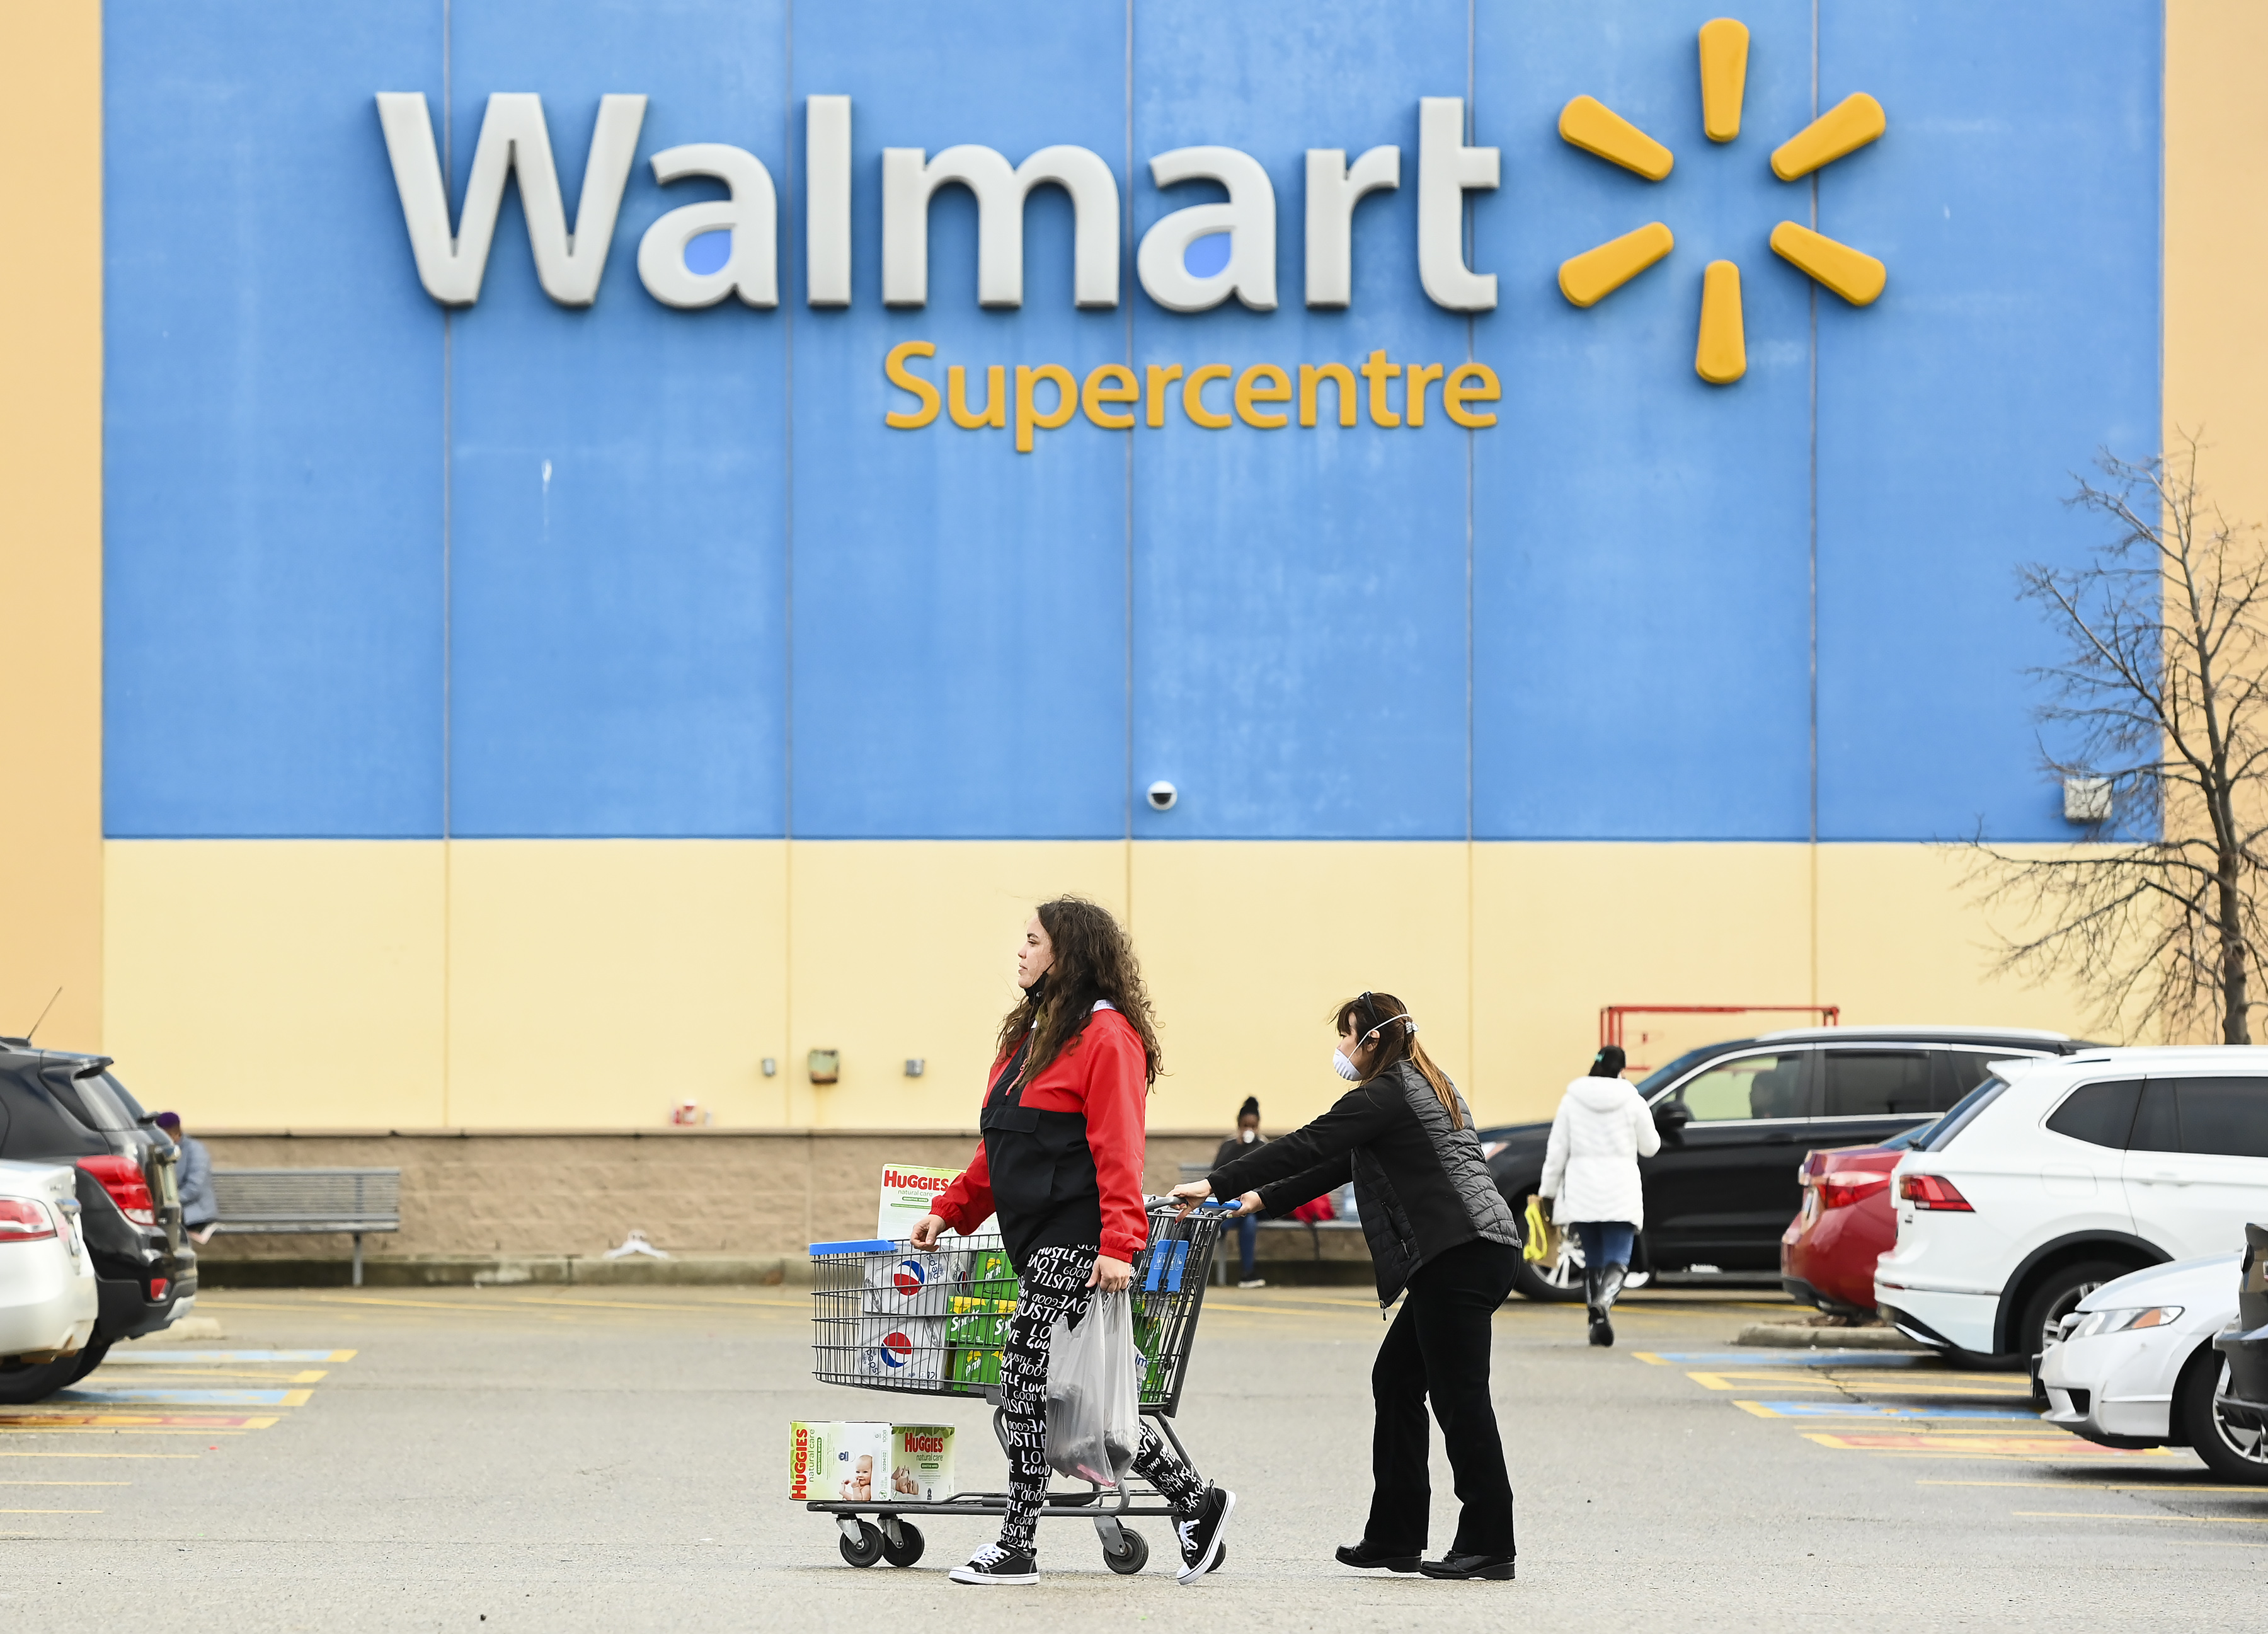 Walmart Canada says it will spend $1B to ‘modernize’ its stores